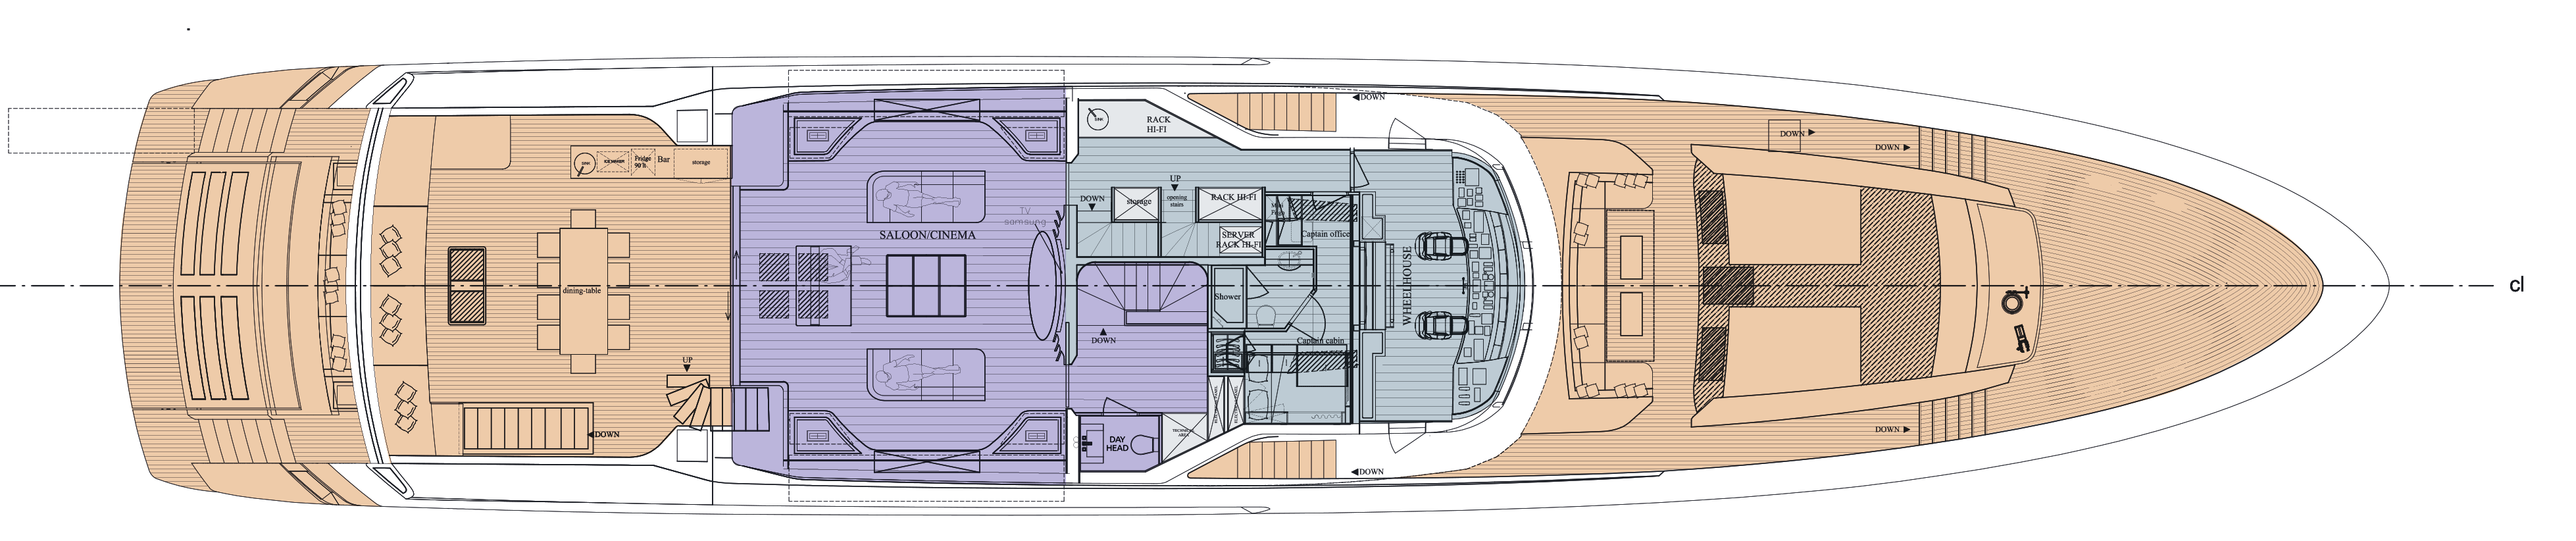 Layout Of The Yacht